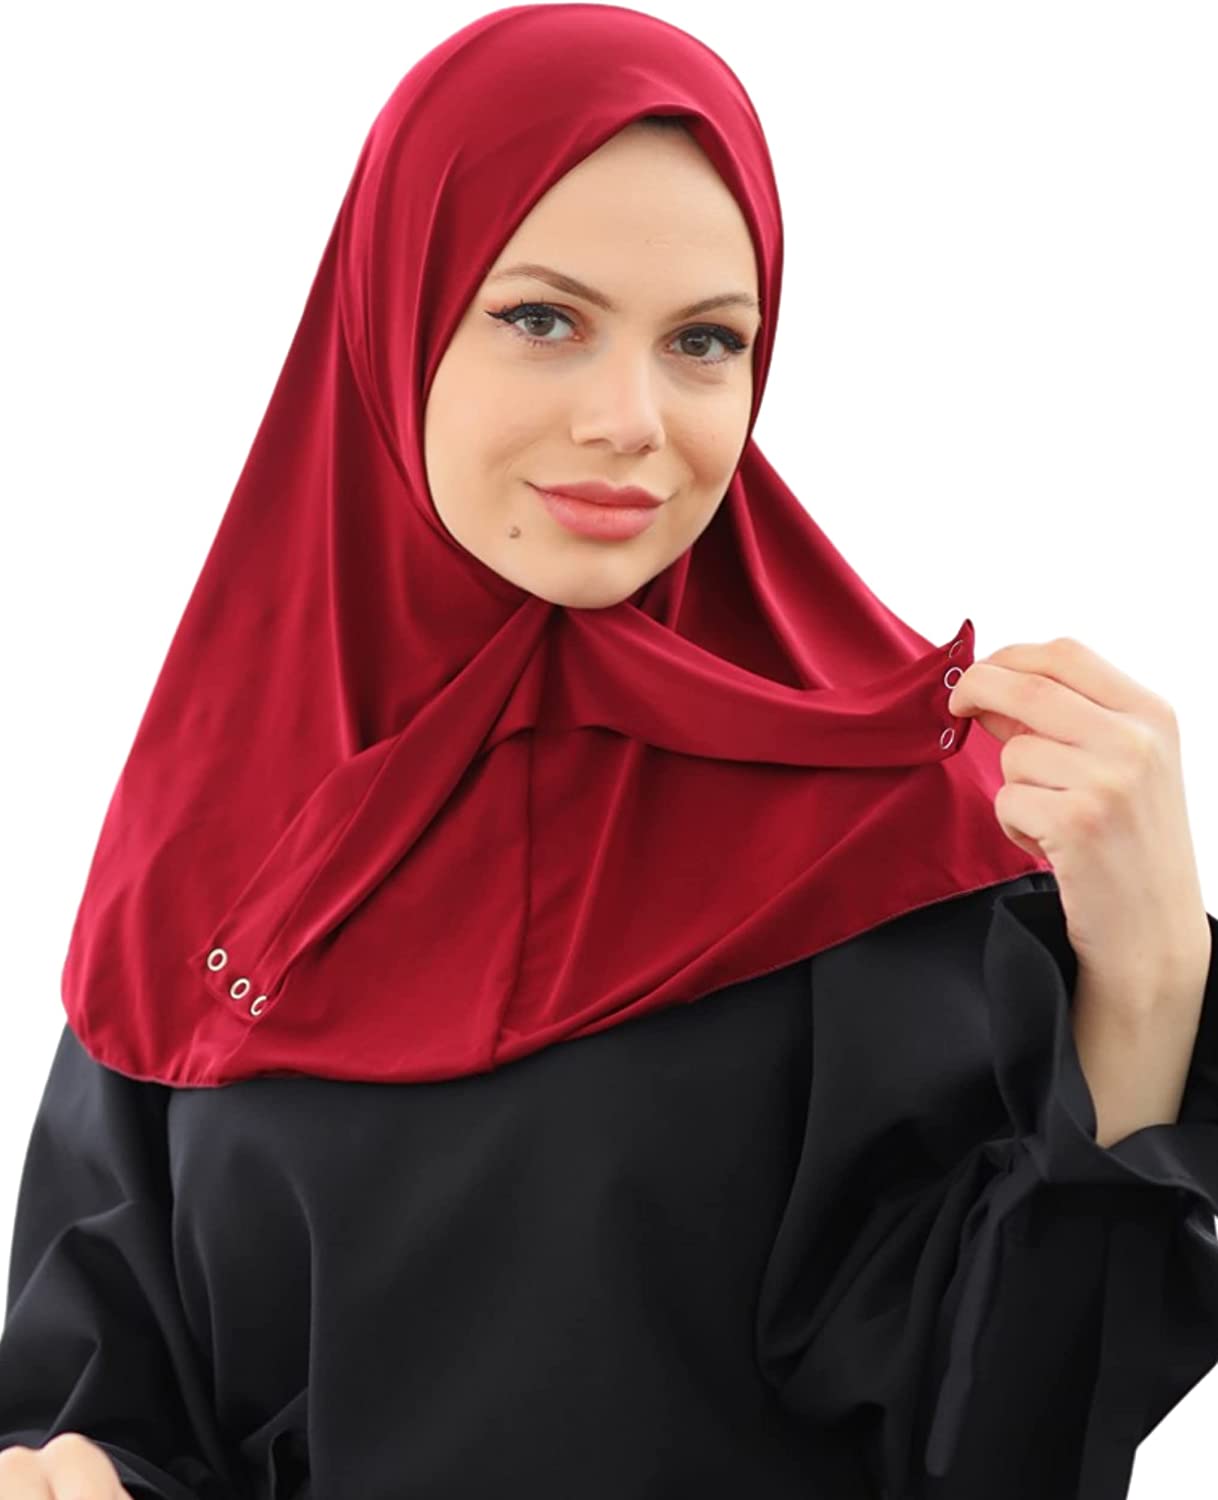 Marwa Fashion Muslim Hijab for Women - Premium Quality Hijab Scarves for Women made up Polyester - Sweat Absorbent